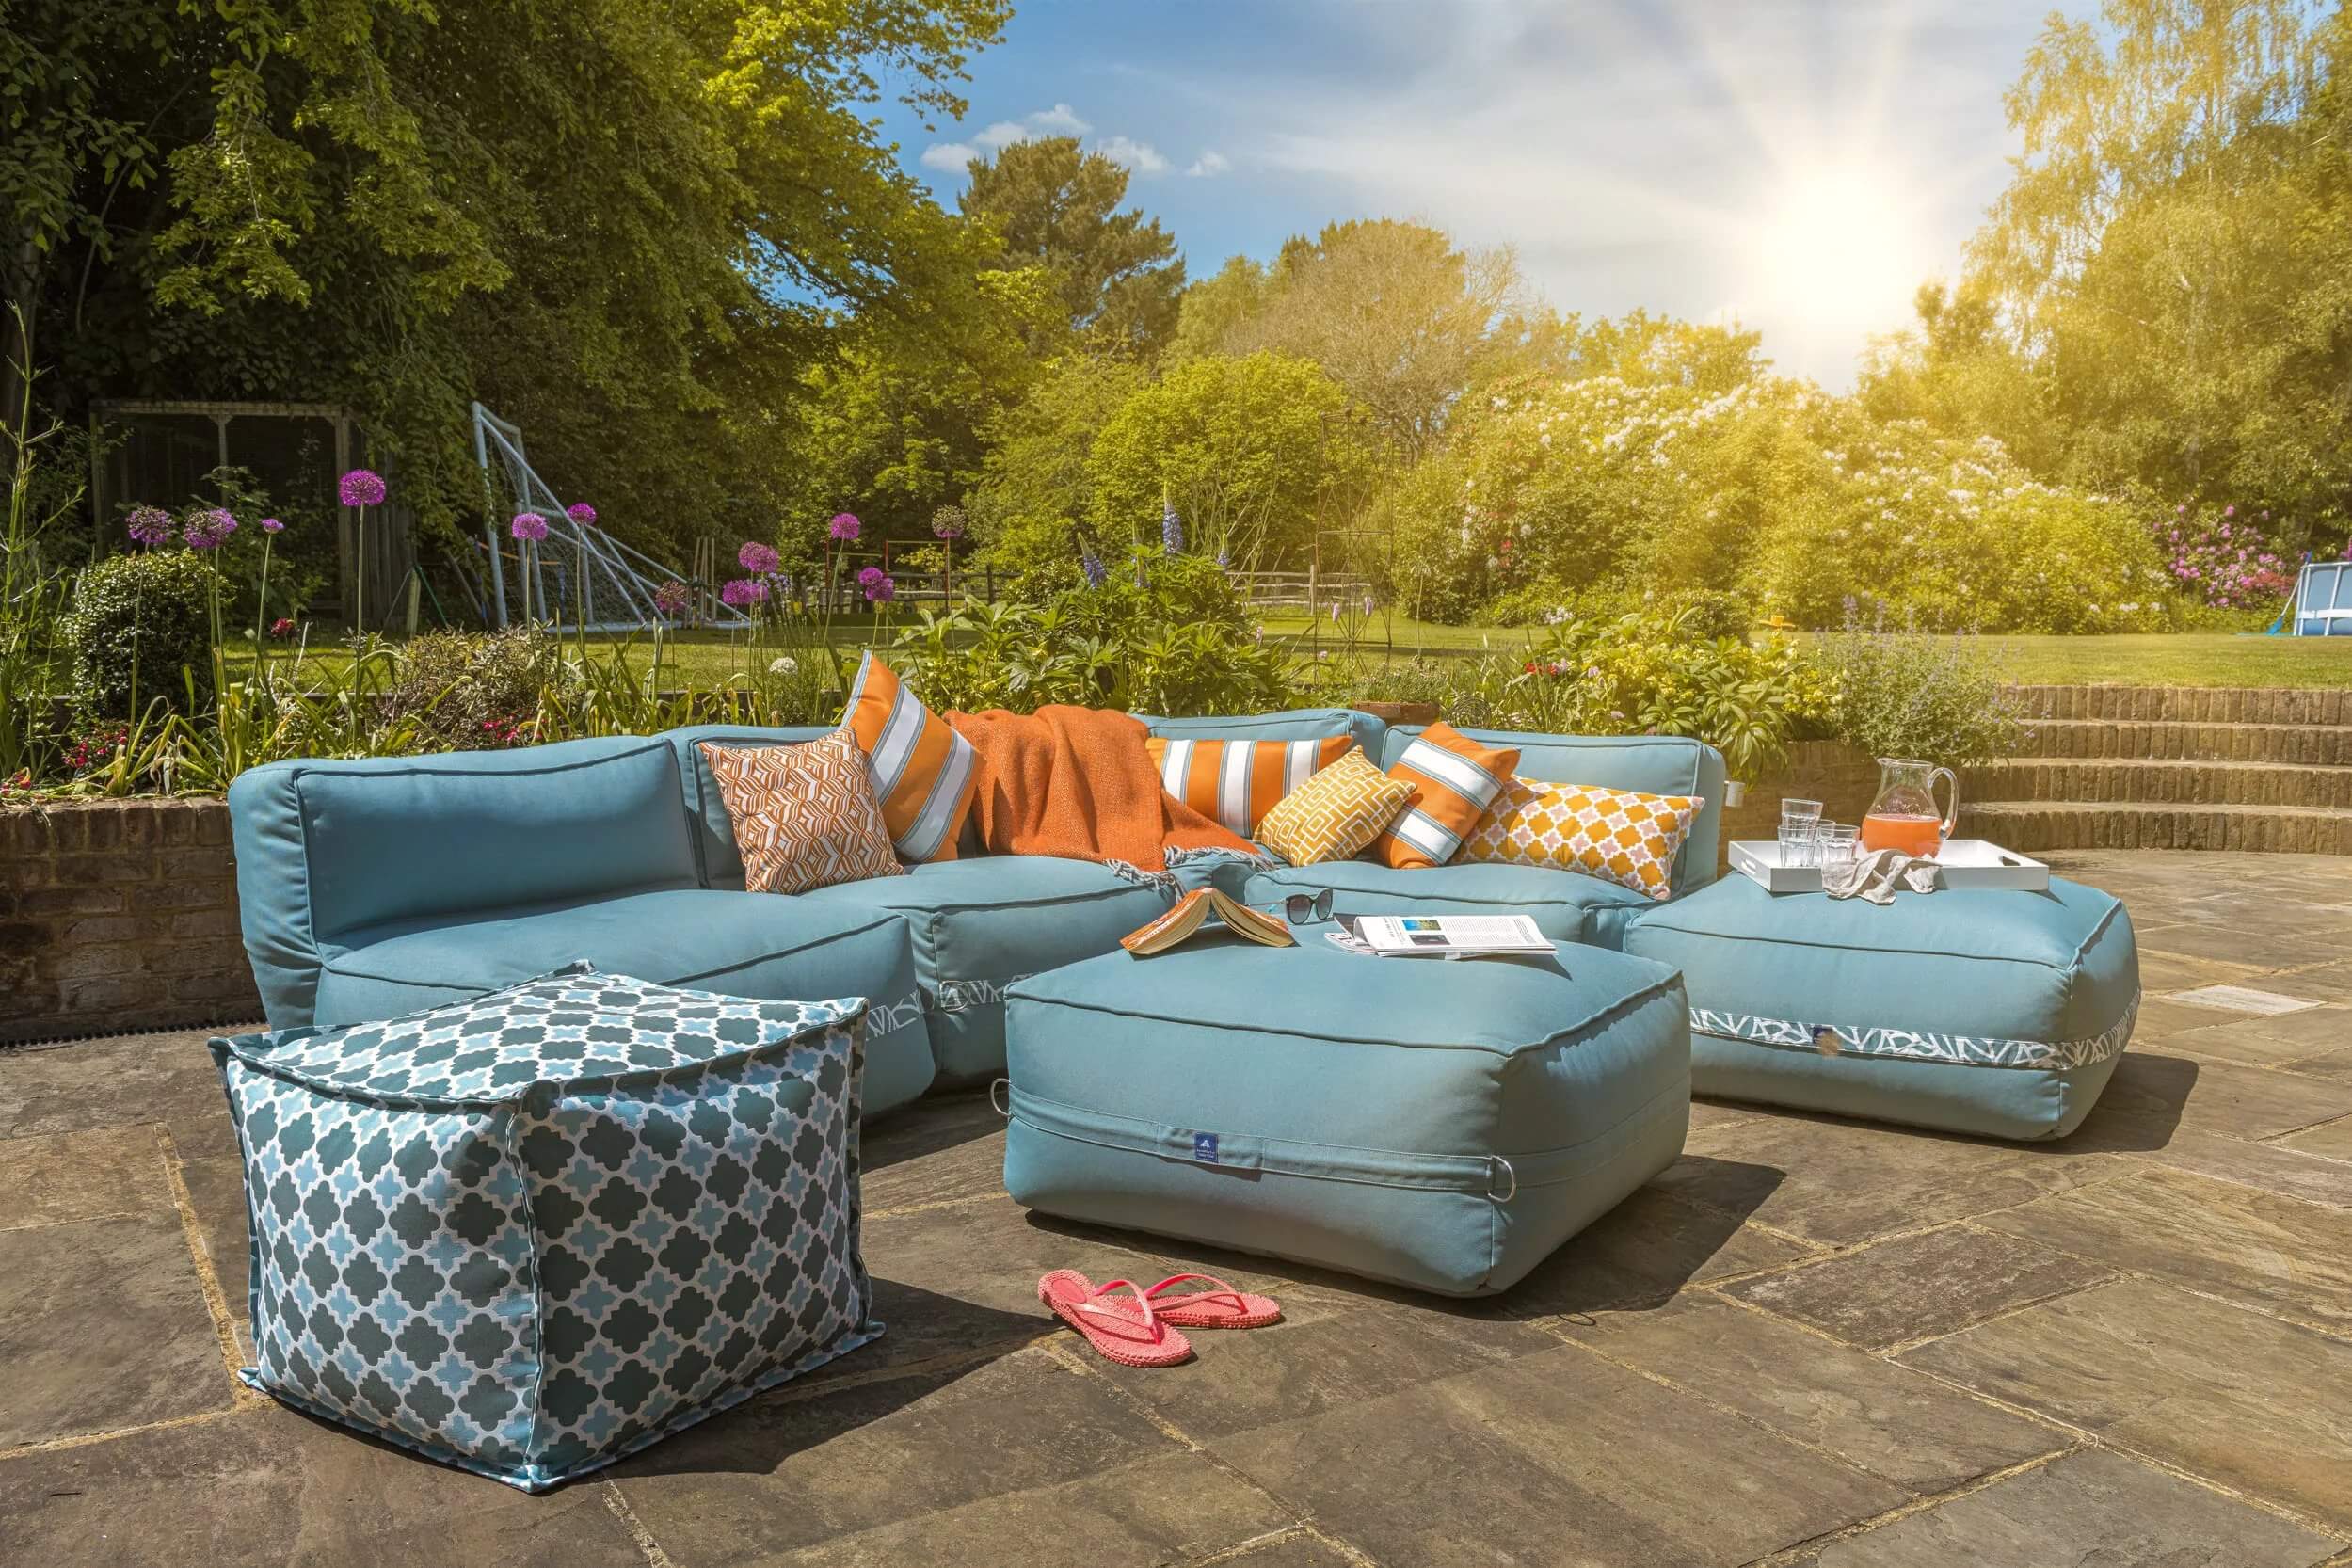 A garden sofa decorated with bright orange cushions is set-up for outdoor entertaining on a sunny patio